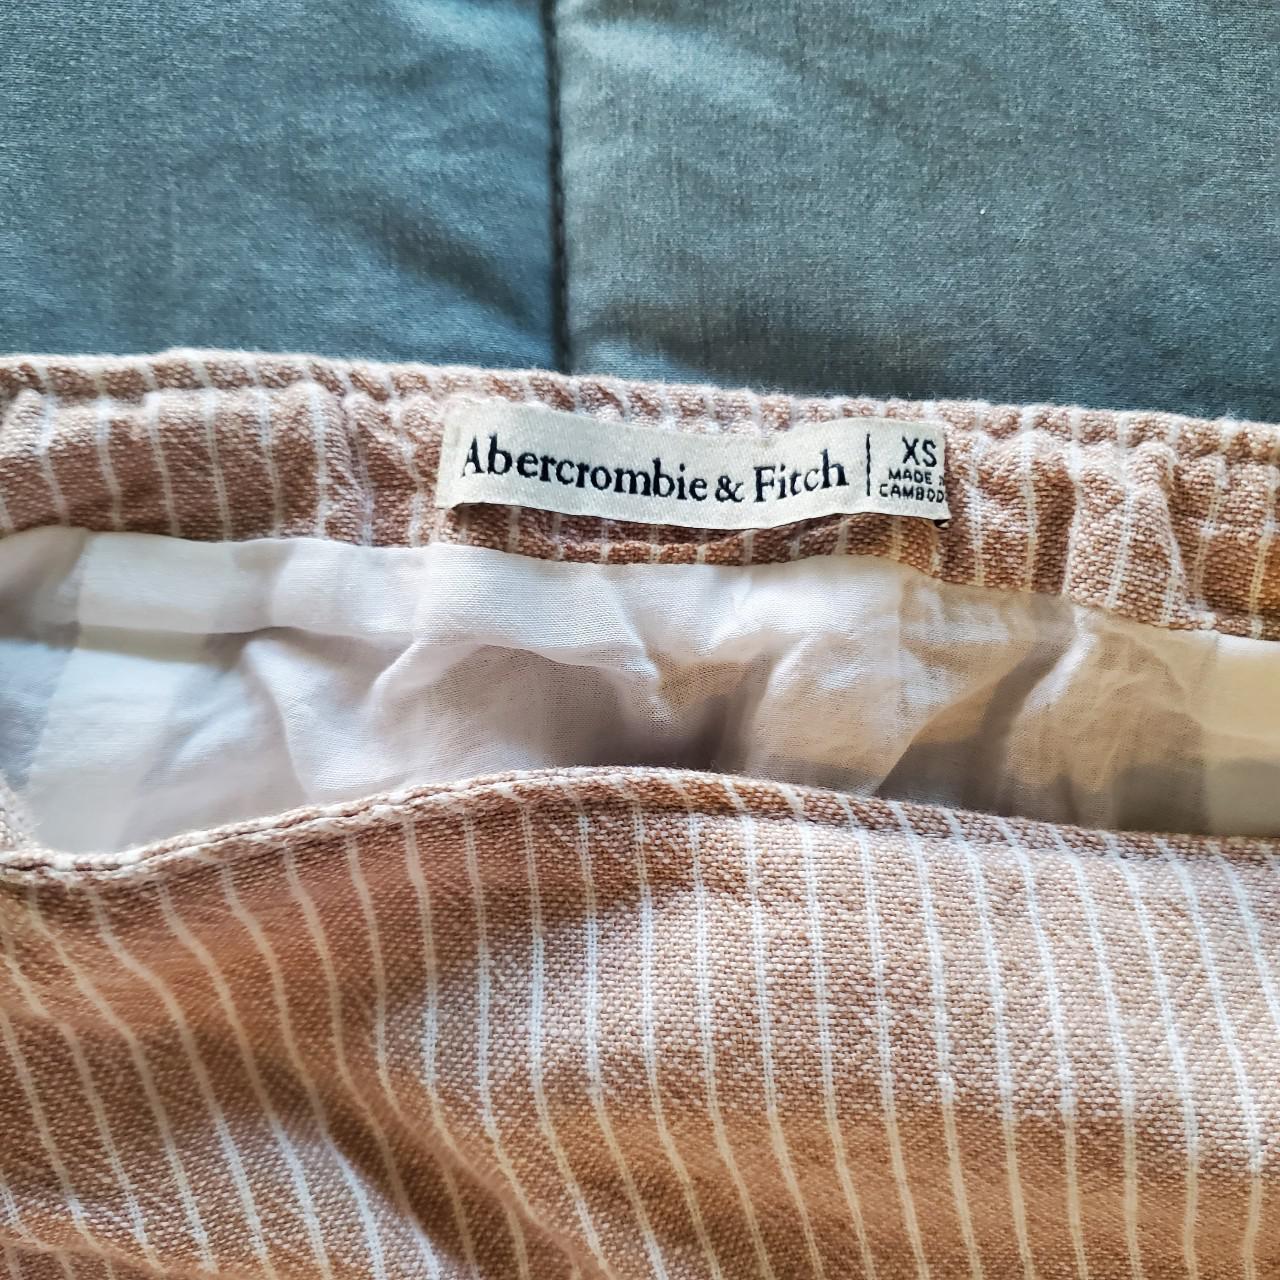 Abercrombie & Fitch Women's Tan and White Skirt (3)